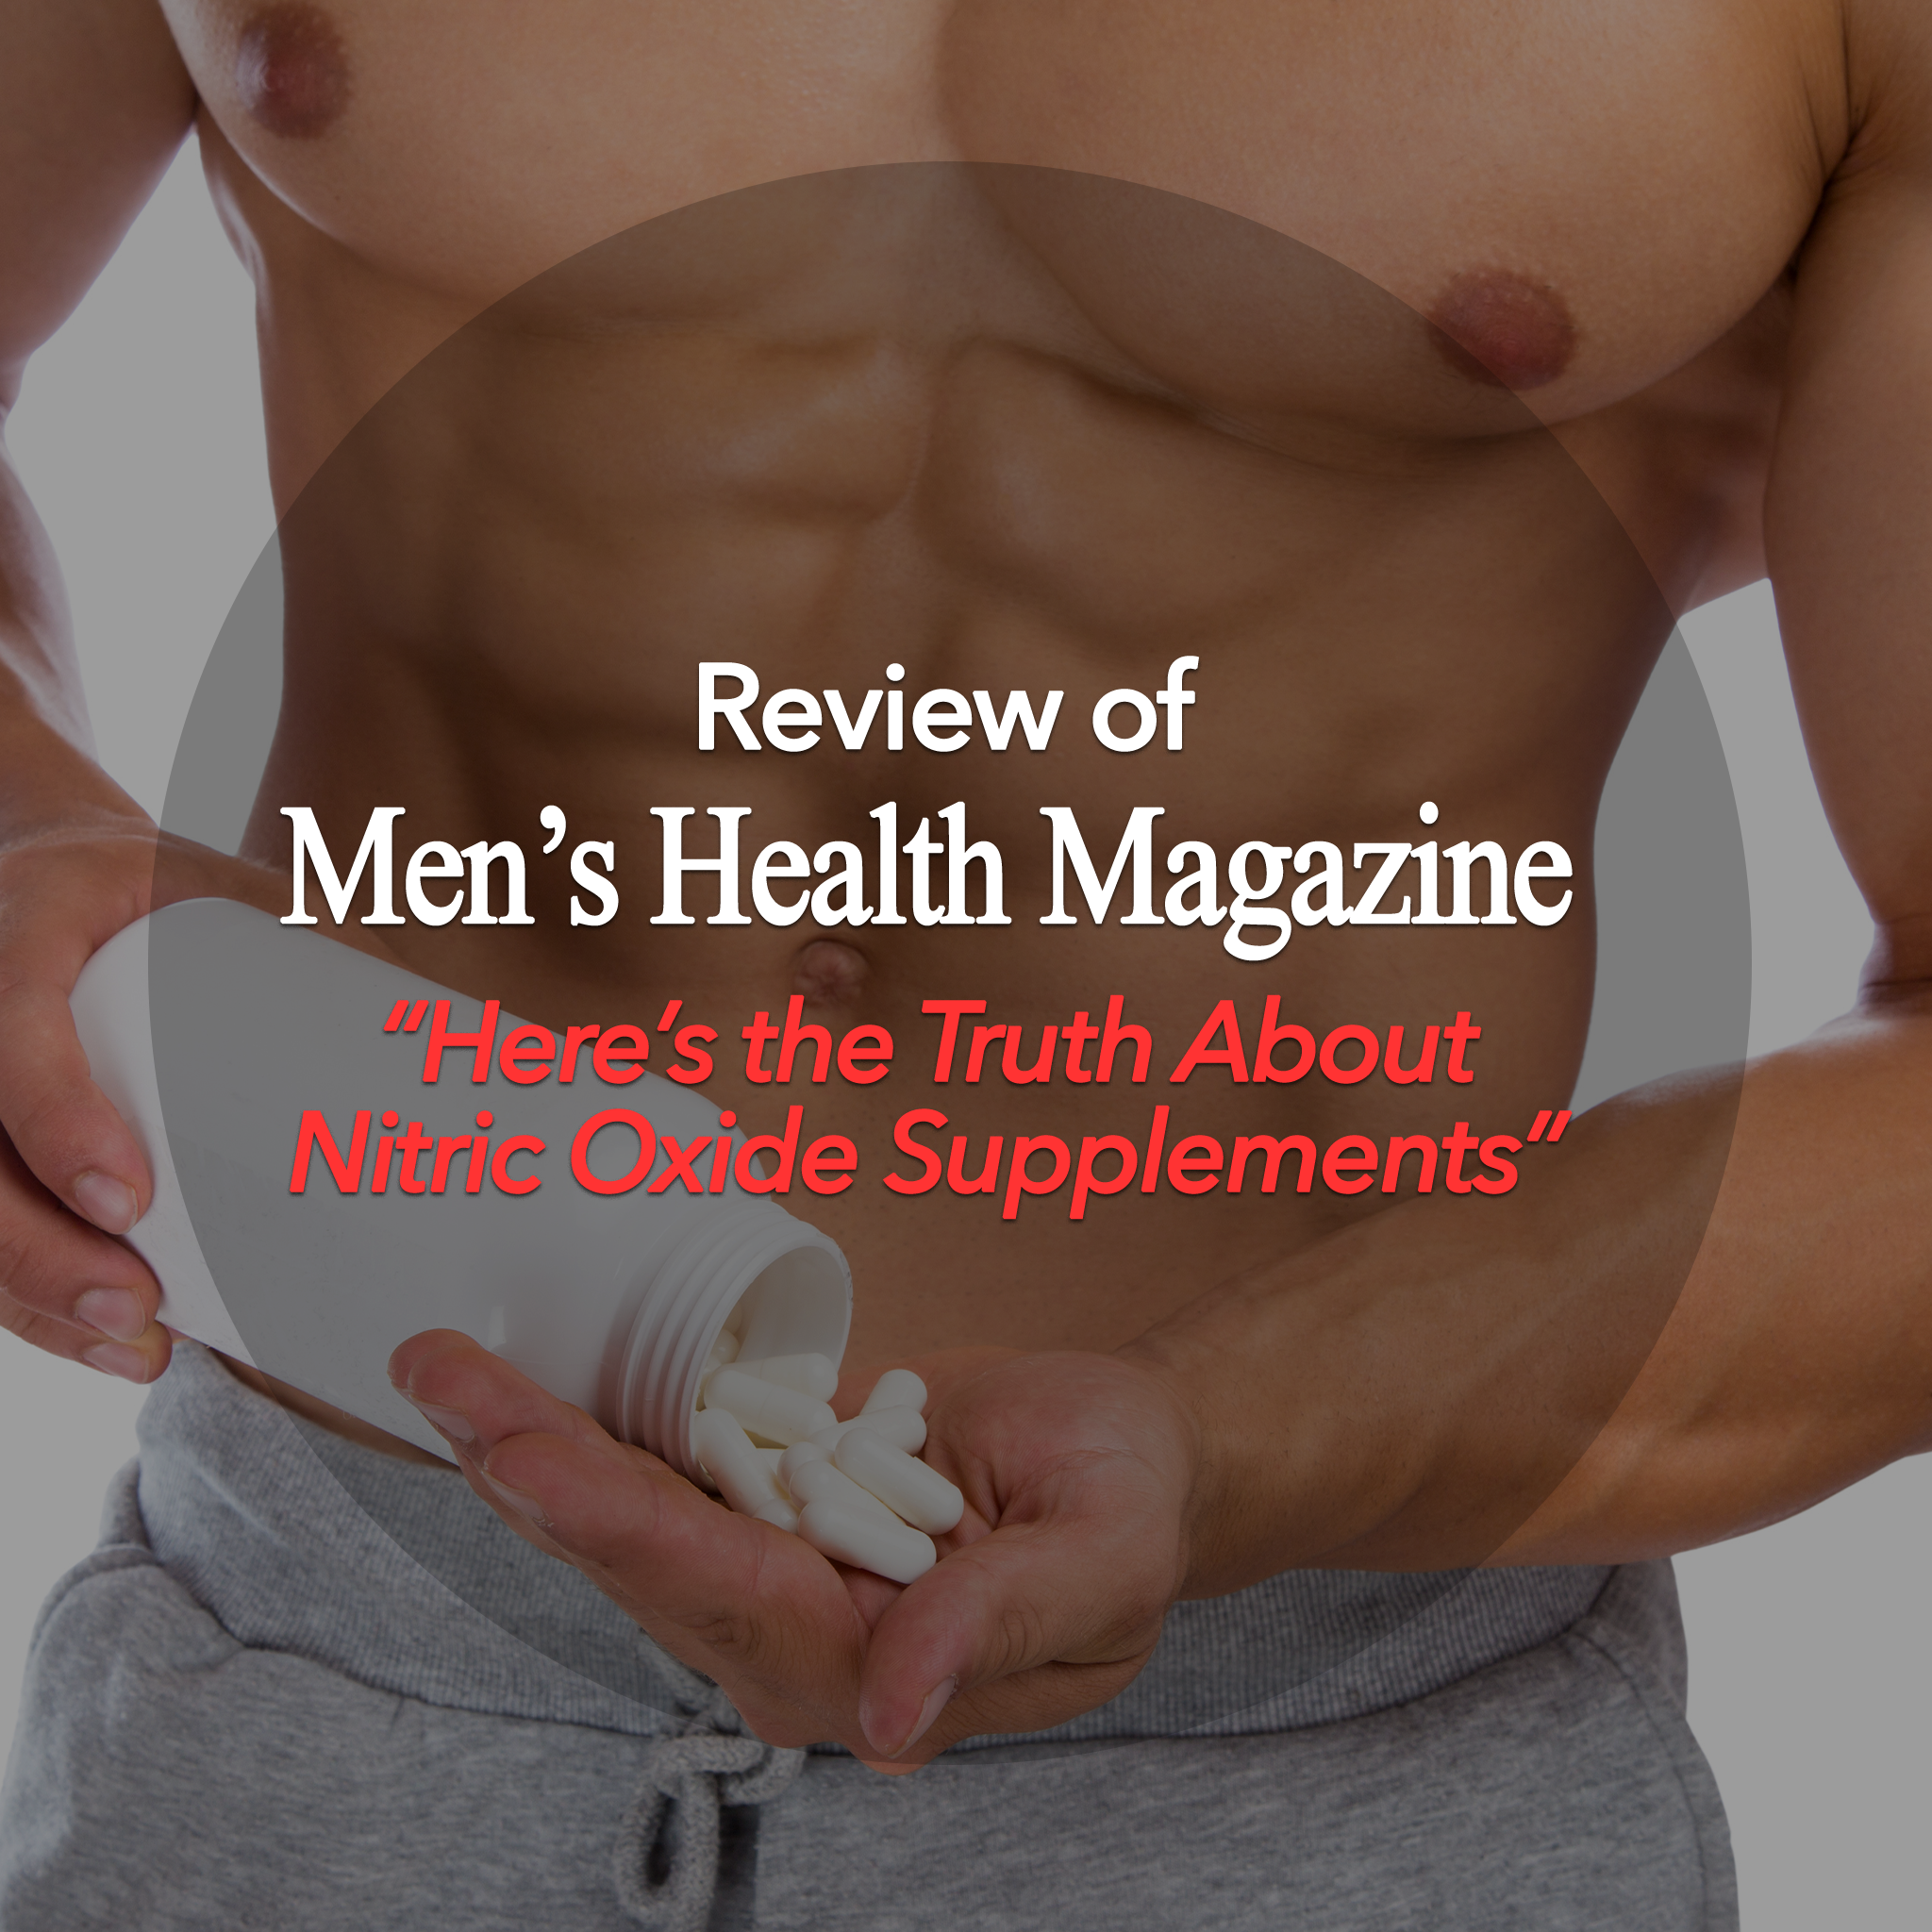 Fit, lean, muscular tan man with six pack abs and strong pectoral muscles, wearing grey sweatpants. holding a large white bottle of a pill supplement with his right hand pouring it into his left hand. The pills are large, oval and white